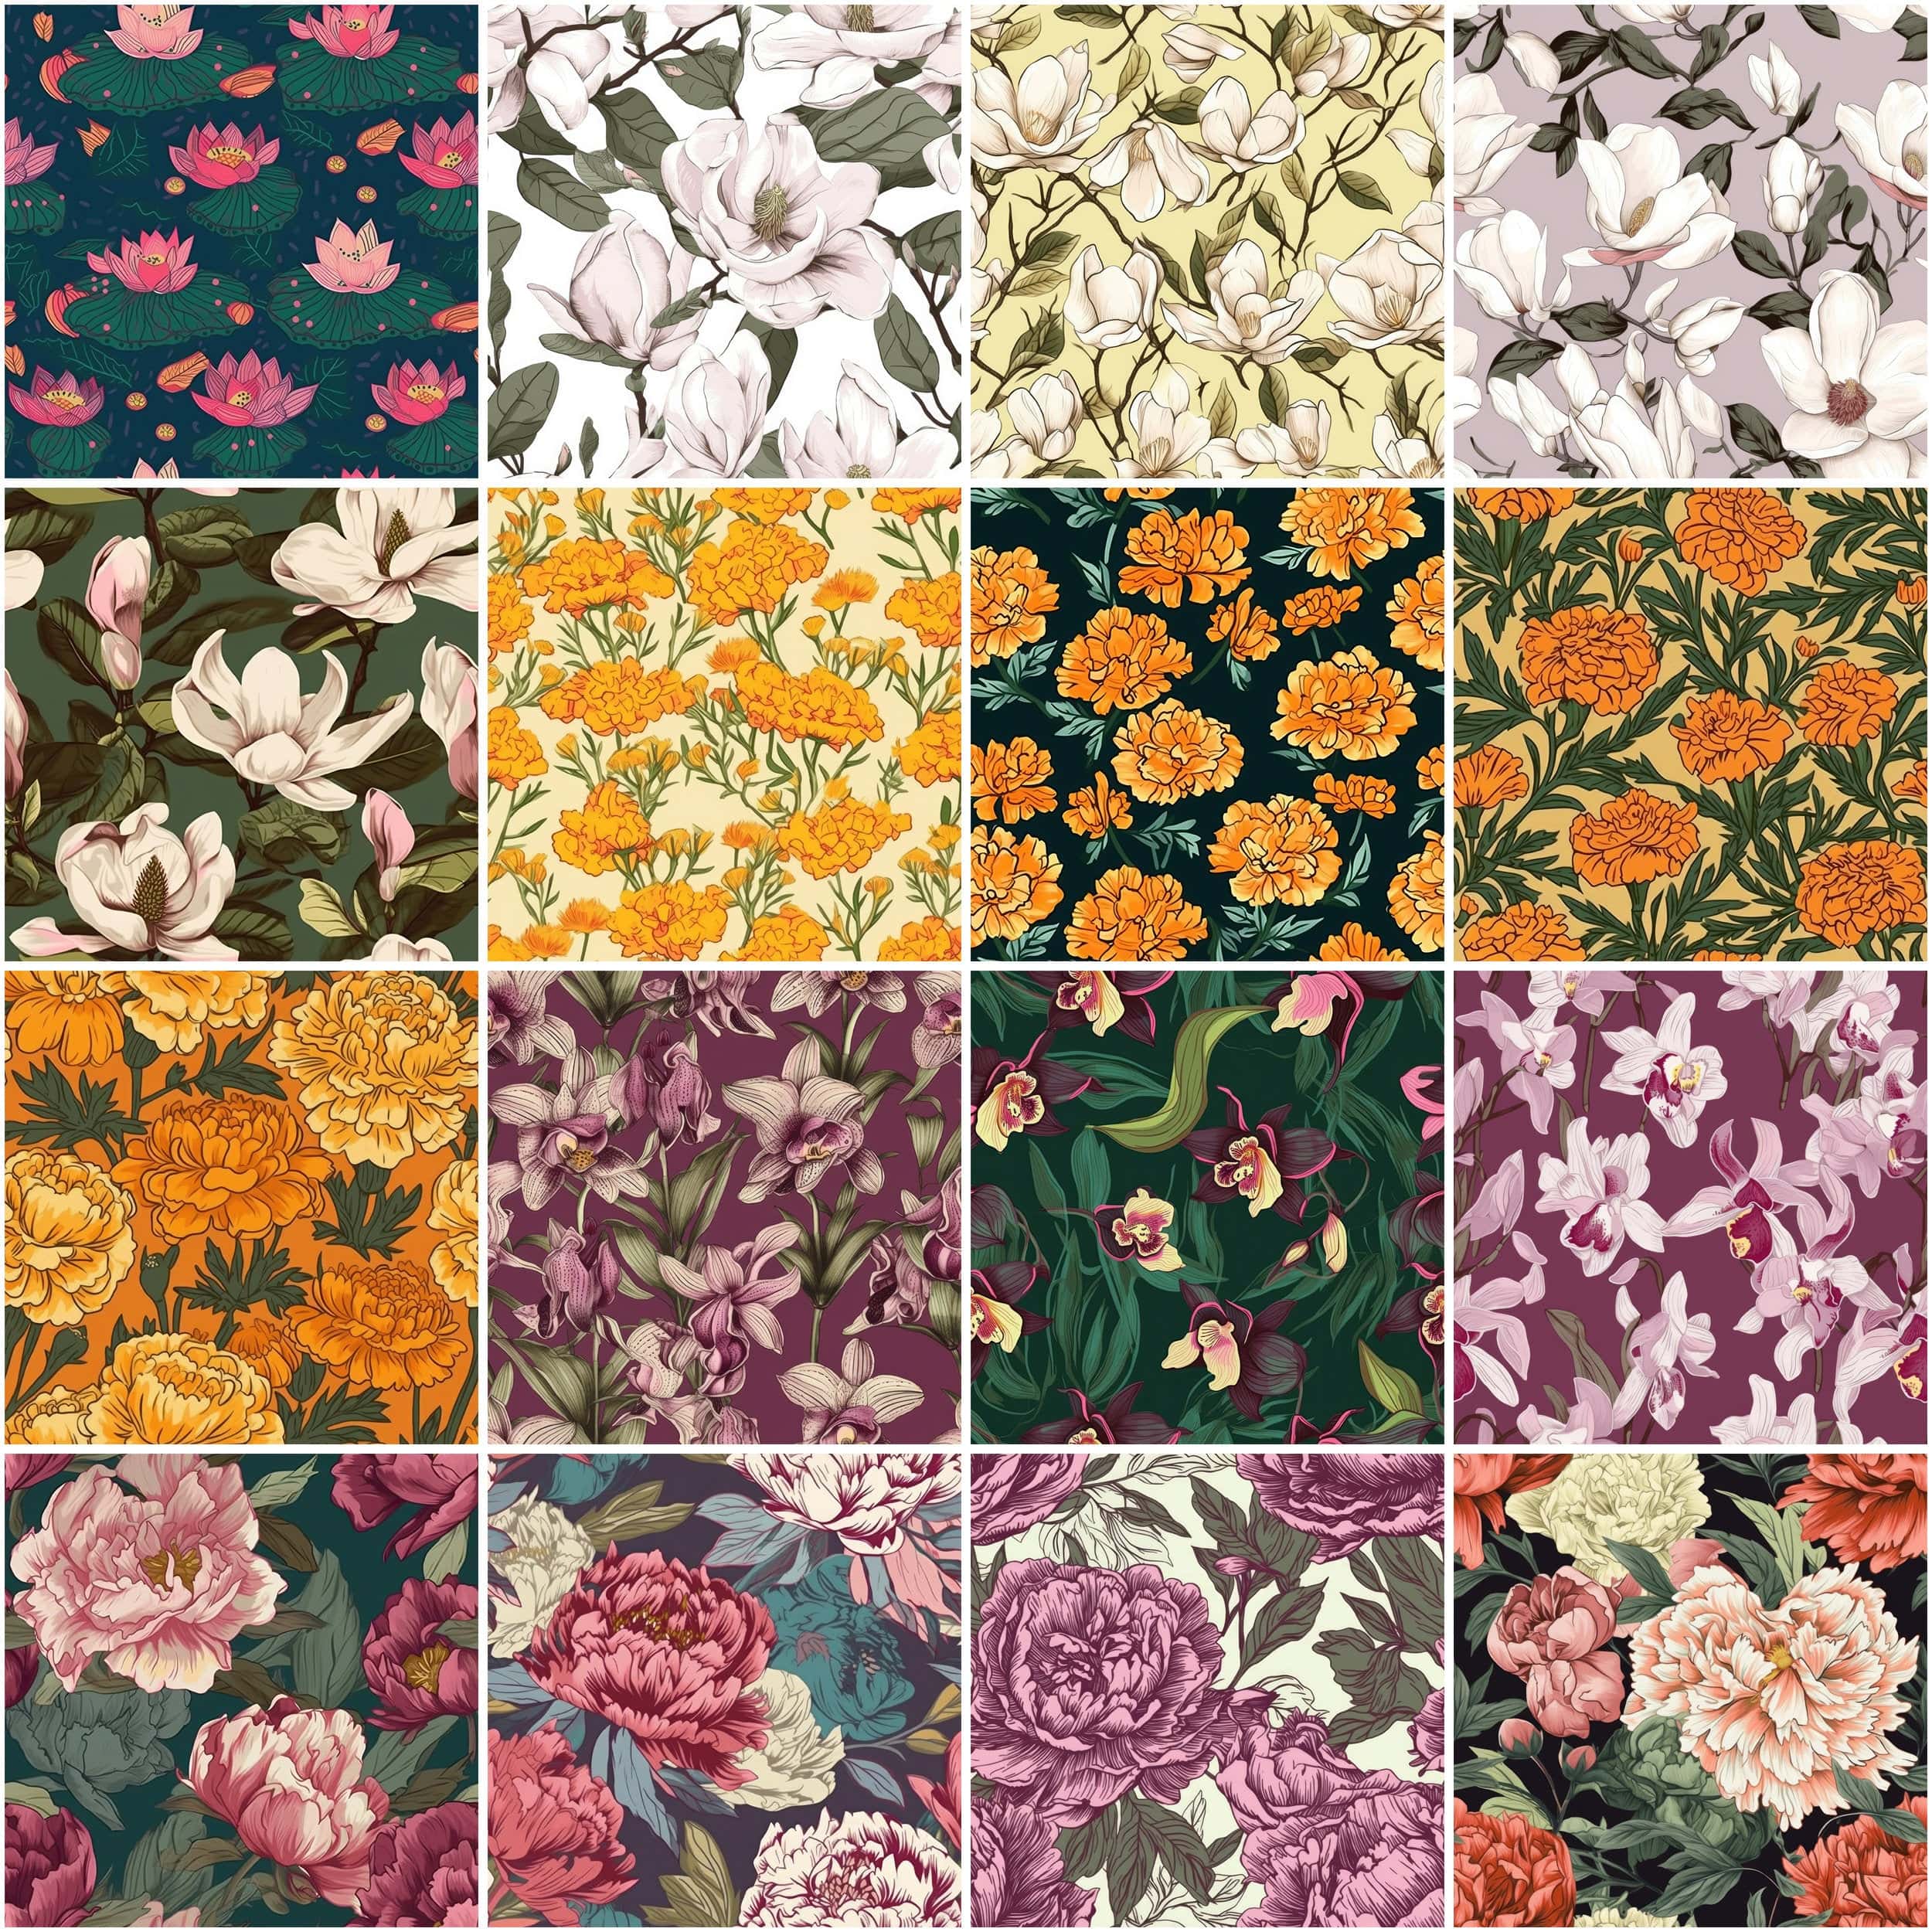 Floral Seamless Patterns Bundle - 80 Beautiful High-Quality Digital Flower Designs for DIY Projects, Crafts & Decor, Repeating patterns Digital Download Sumobundle